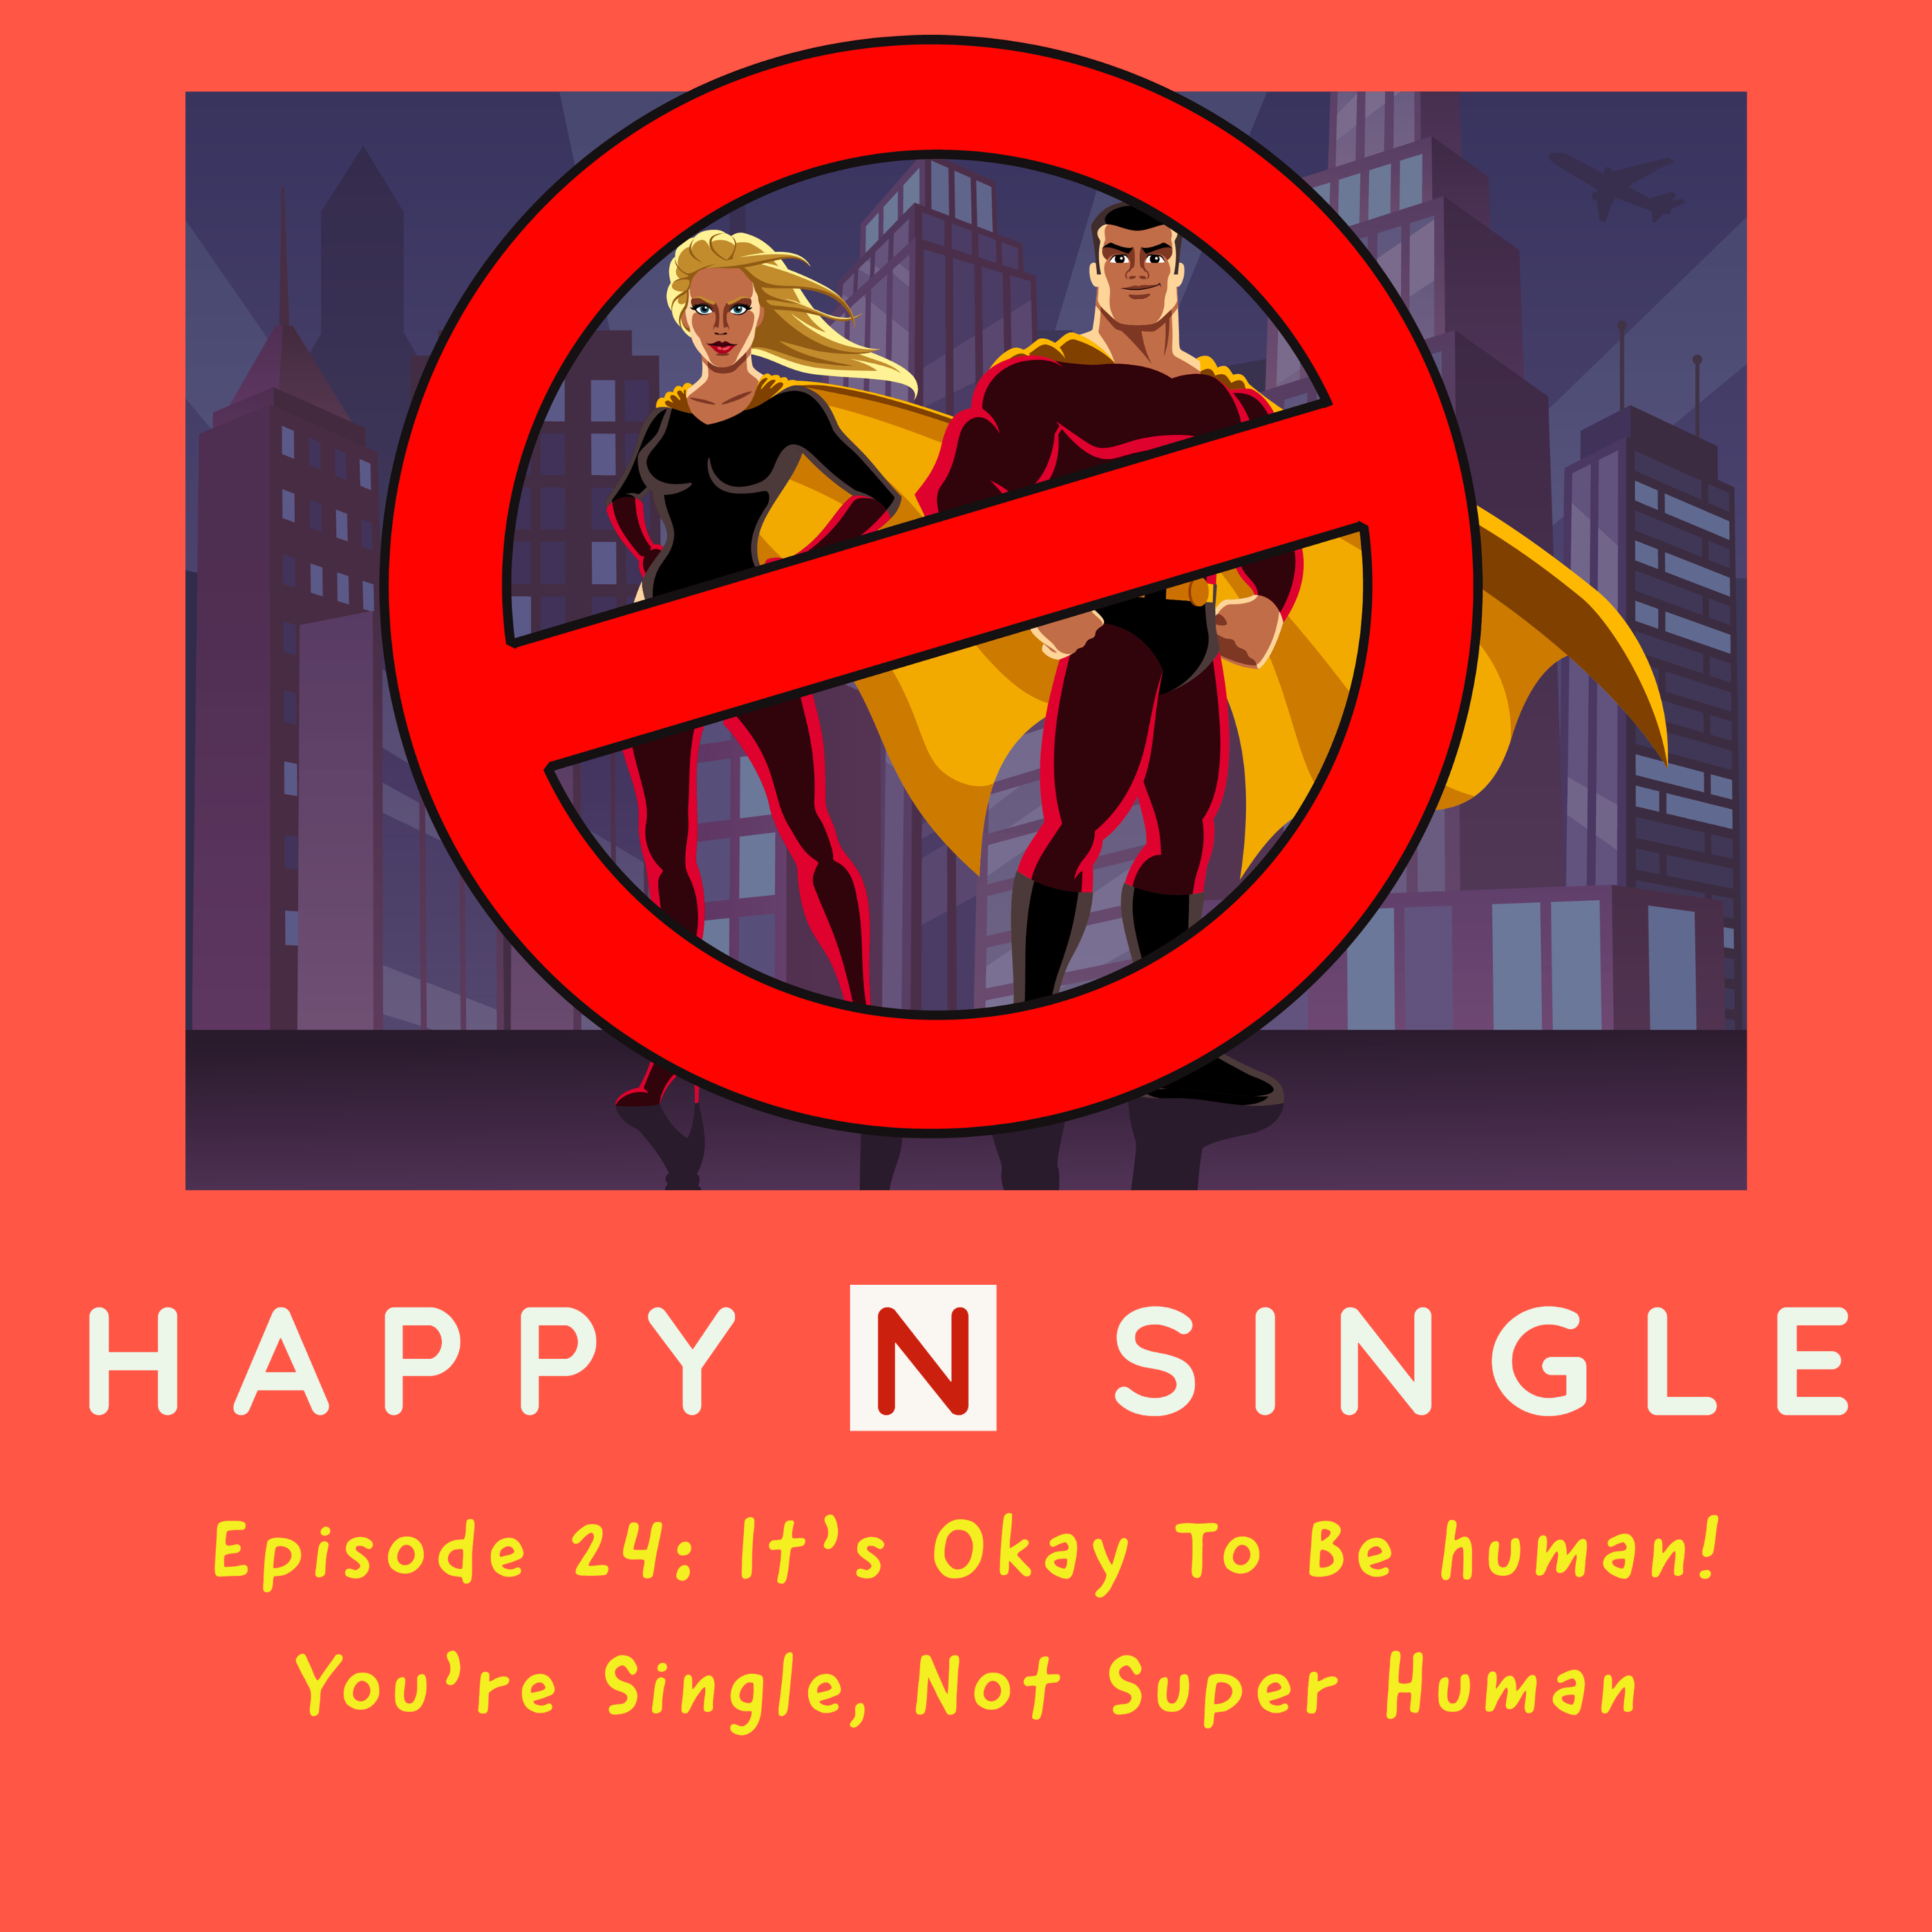 It's Okay To Be human! You're Single, Not Super Human